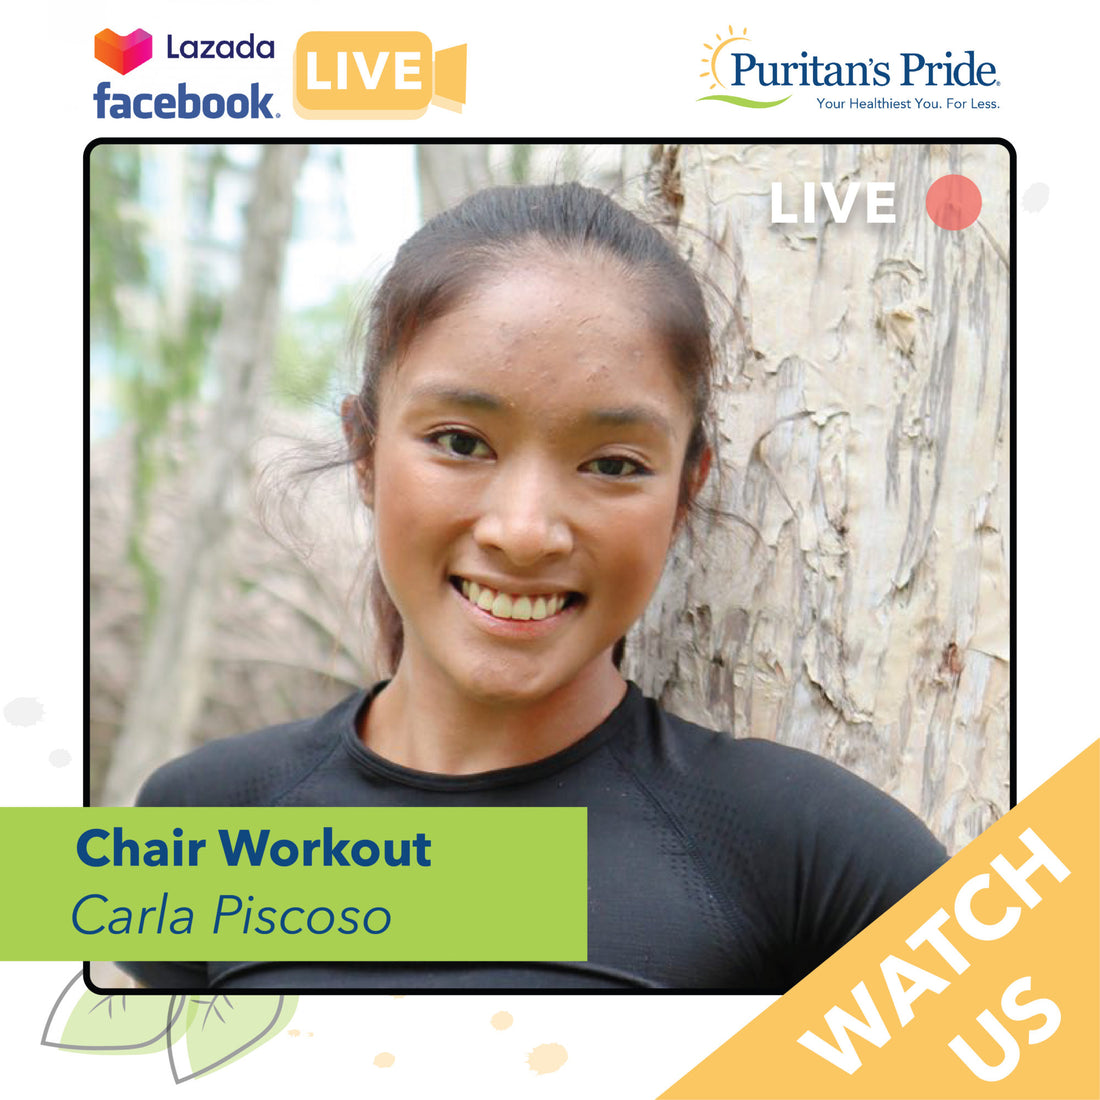 Workout Wednesday: Chair Workout with Carla Piscoso